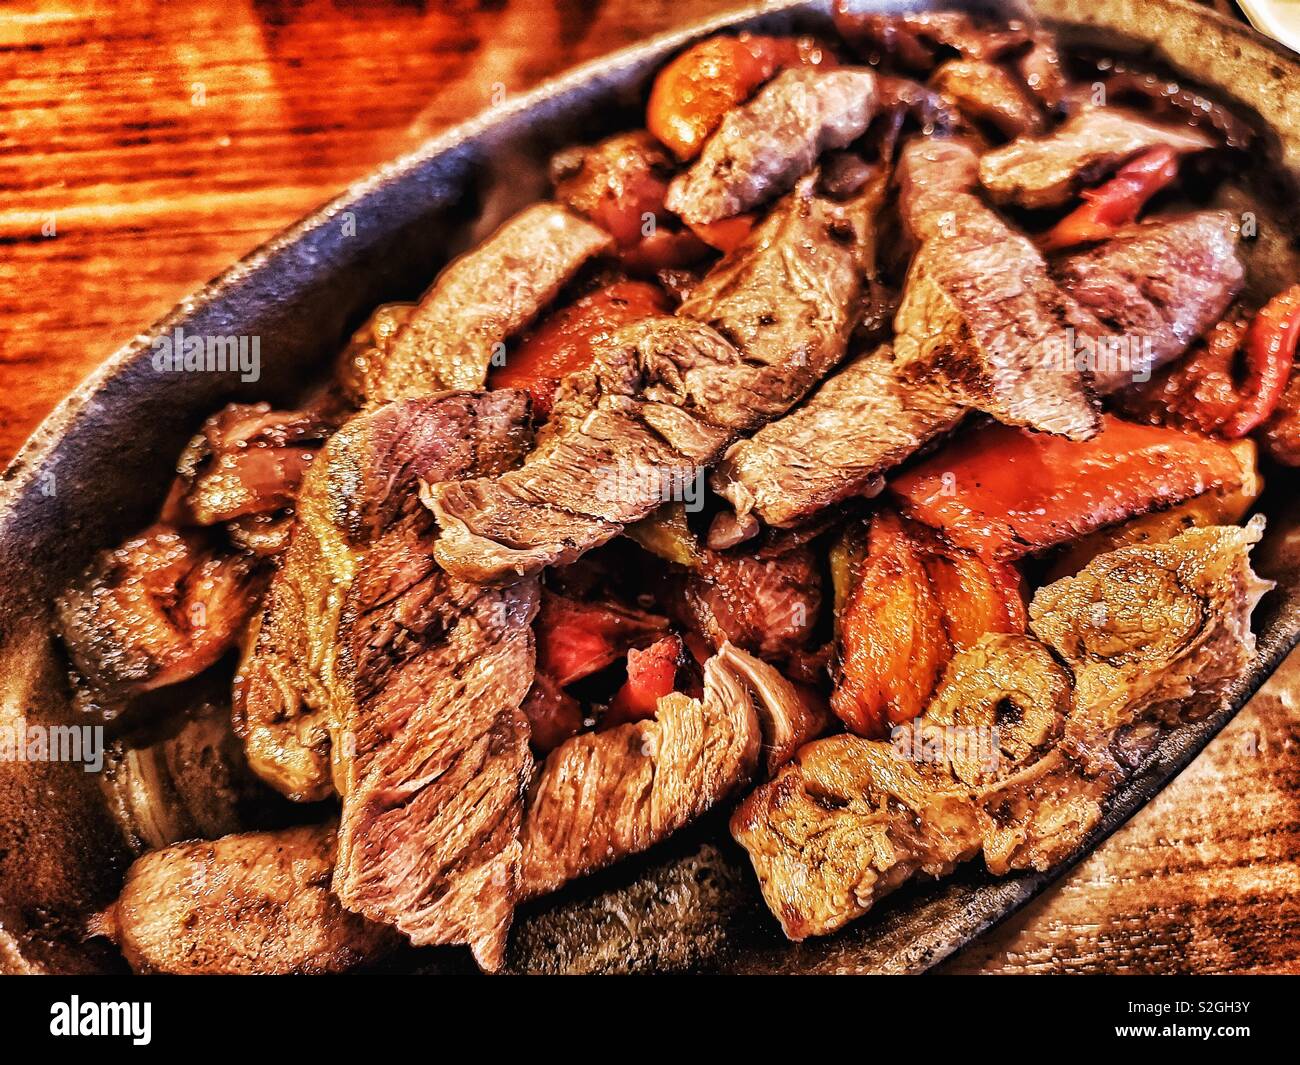 Hot sizzling dish of beef fajitas with peppers and onions Stock Photo